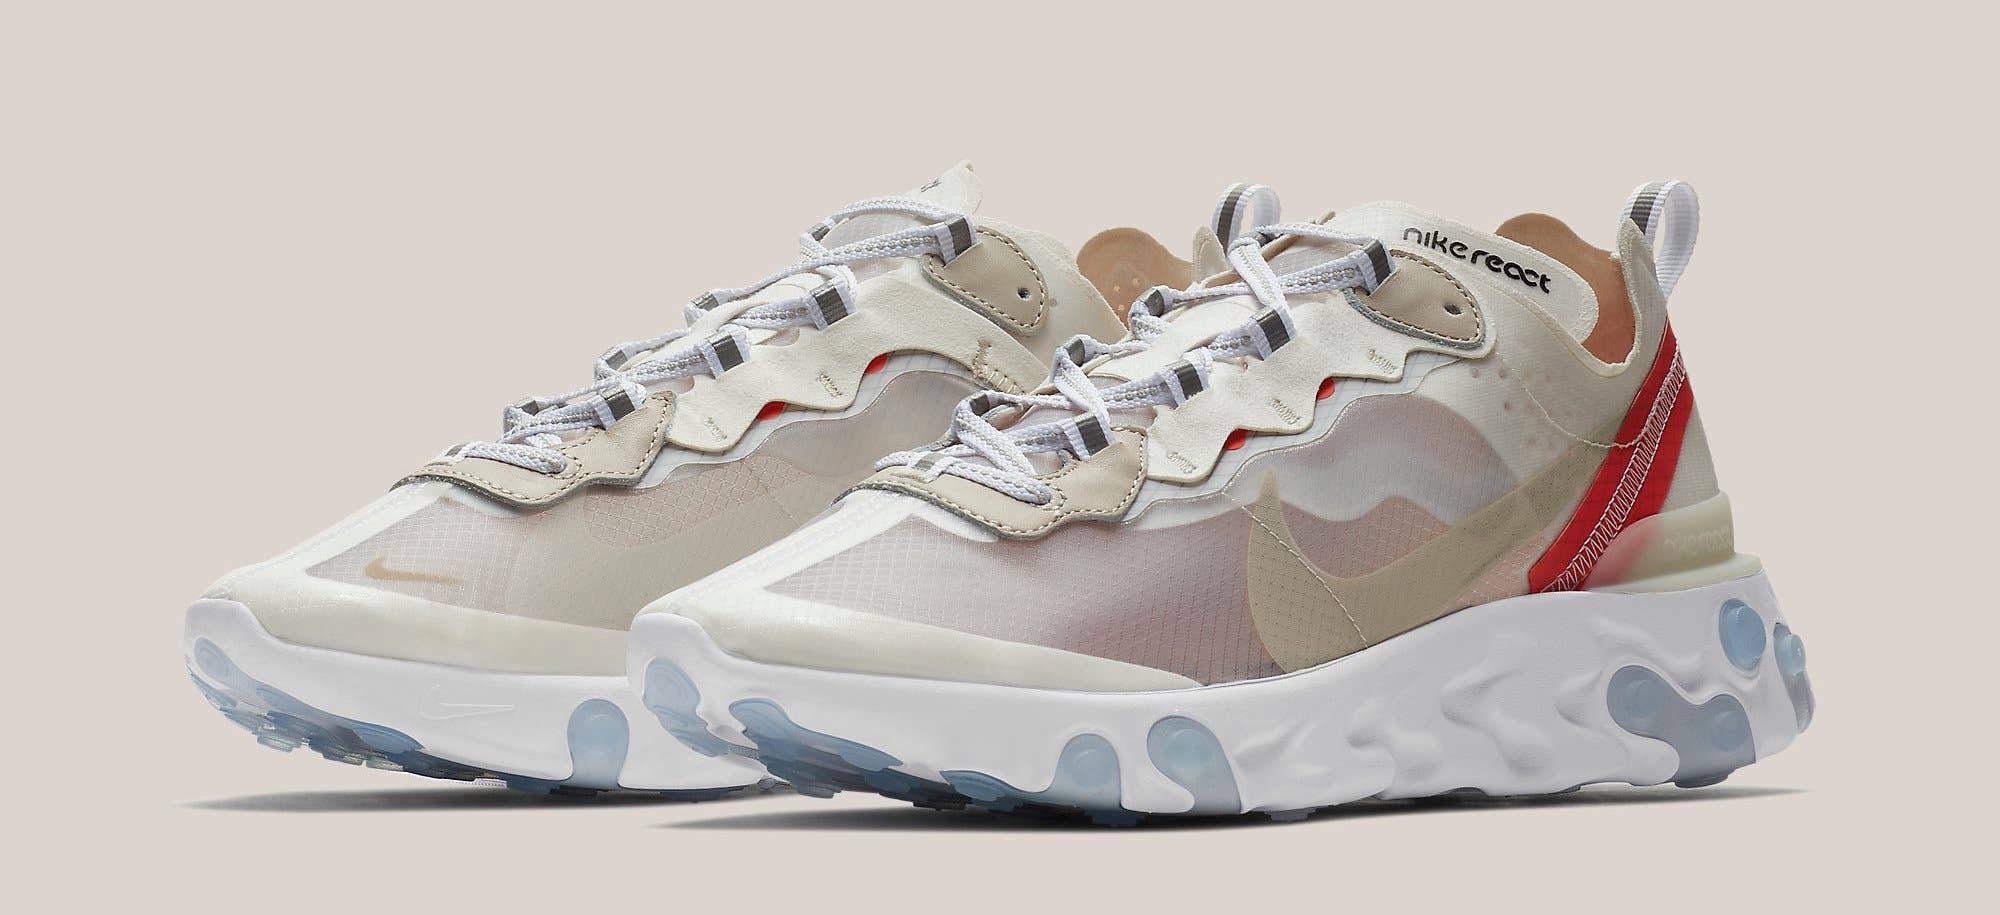 Chance to Get React Element 87s |